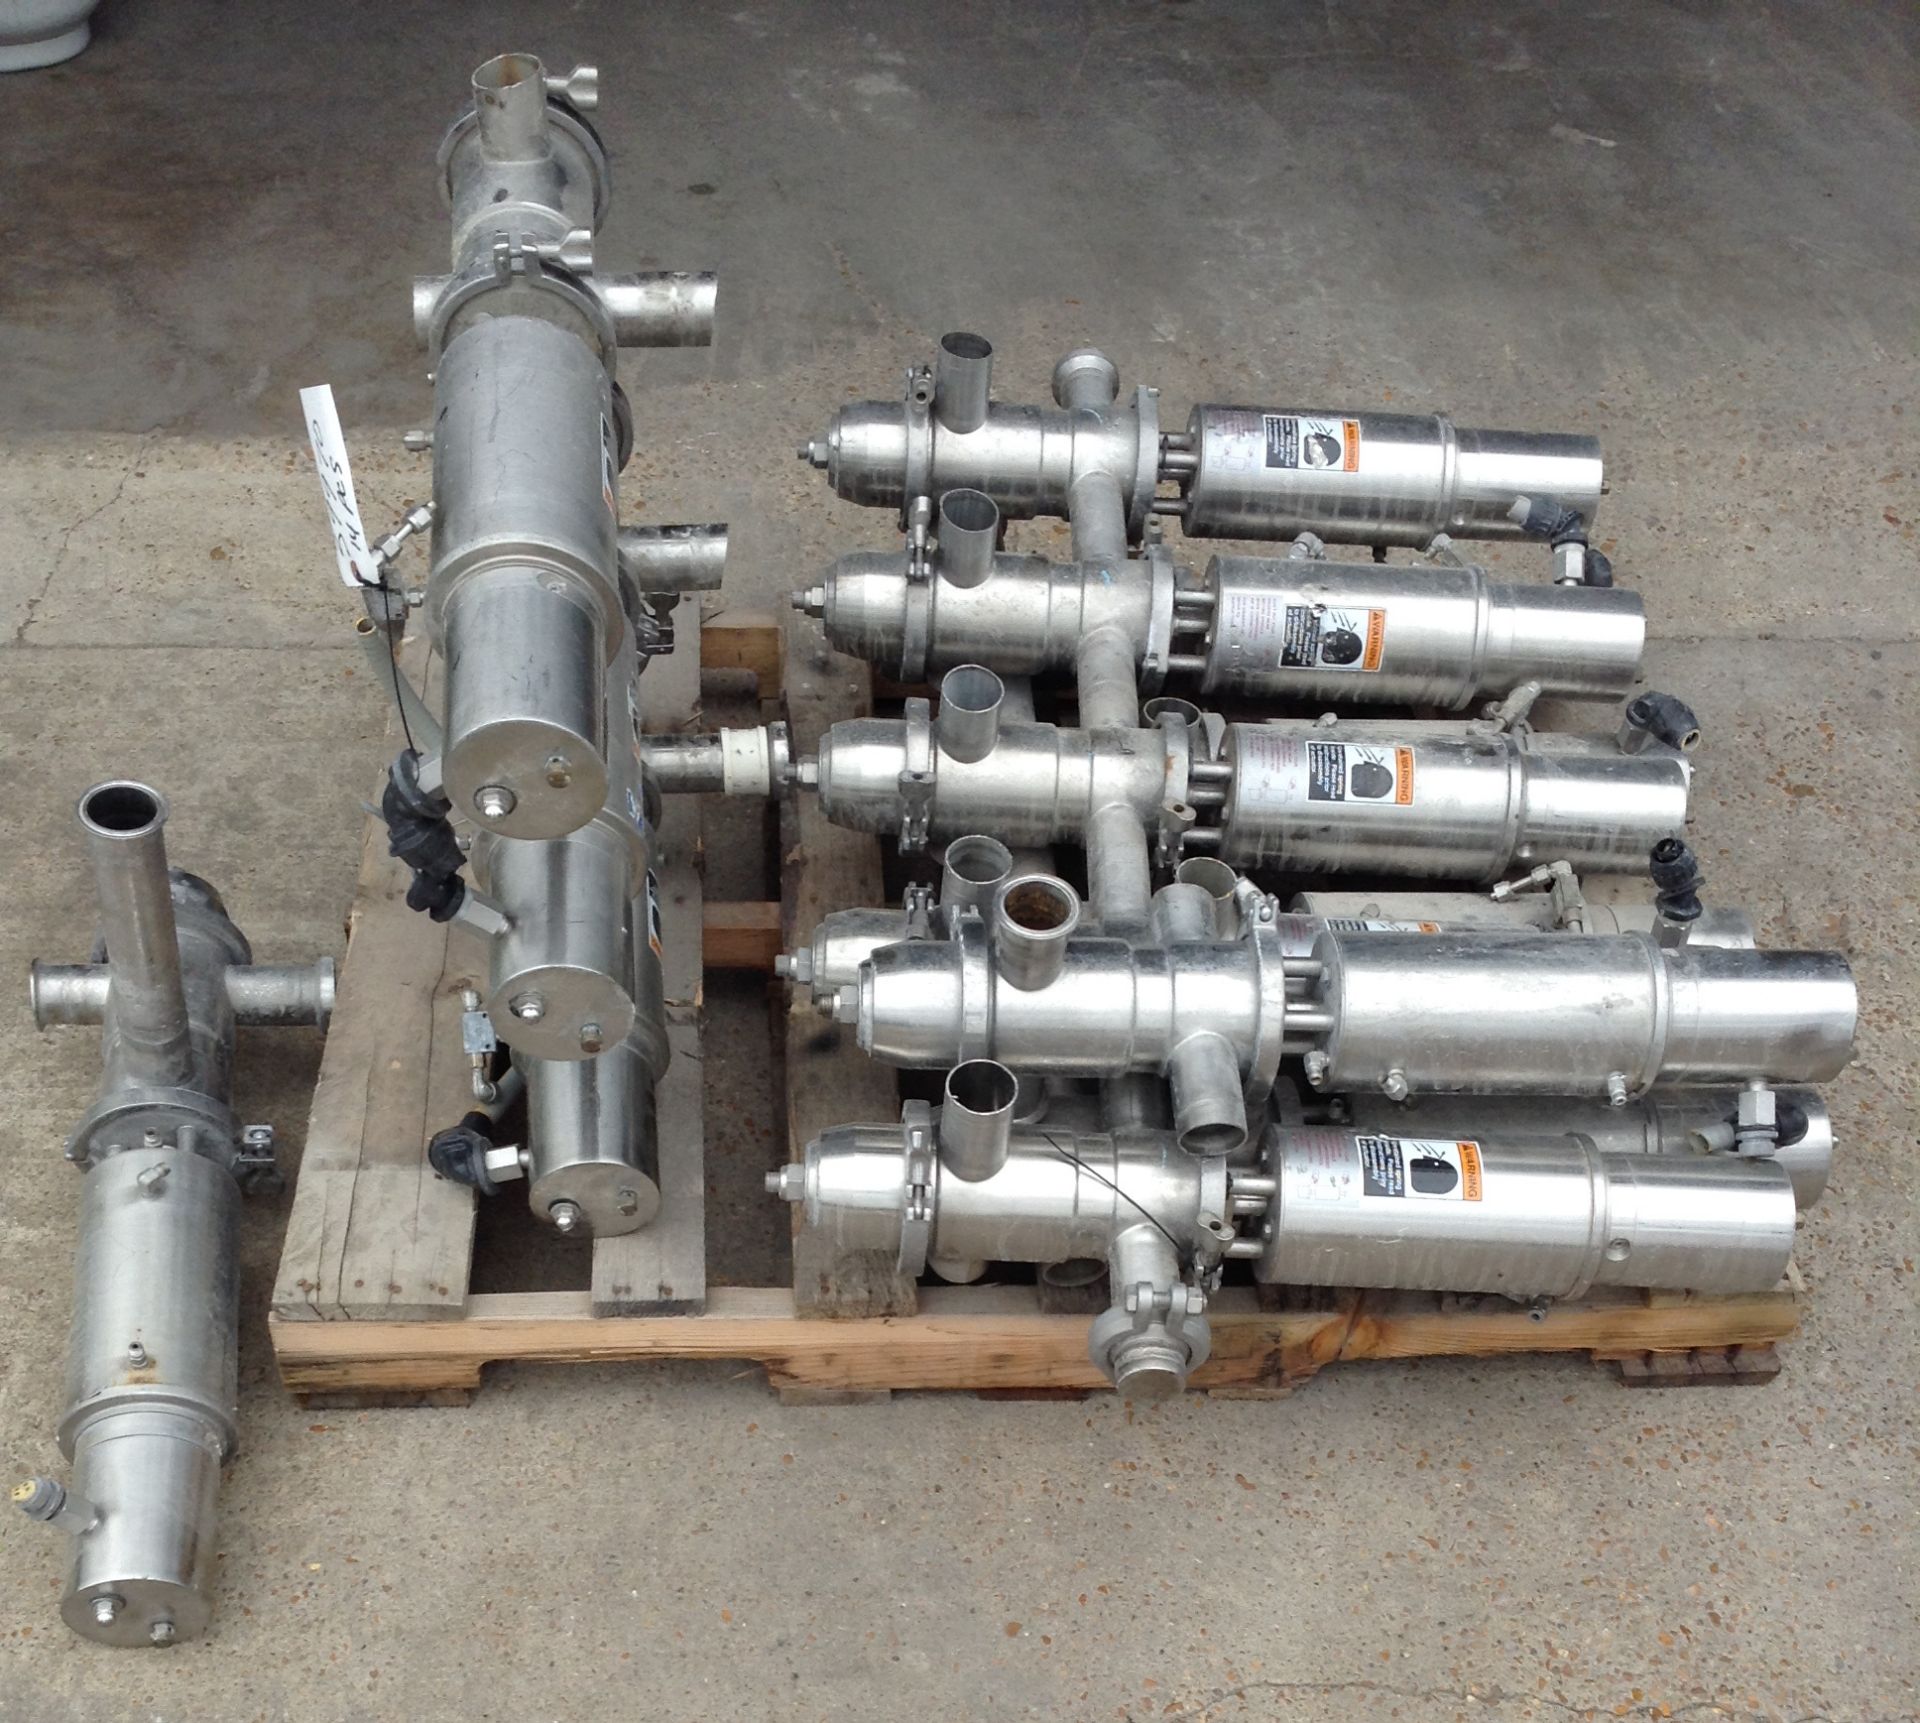 Lot of 14 each 2” product valves - Image 7 of 11